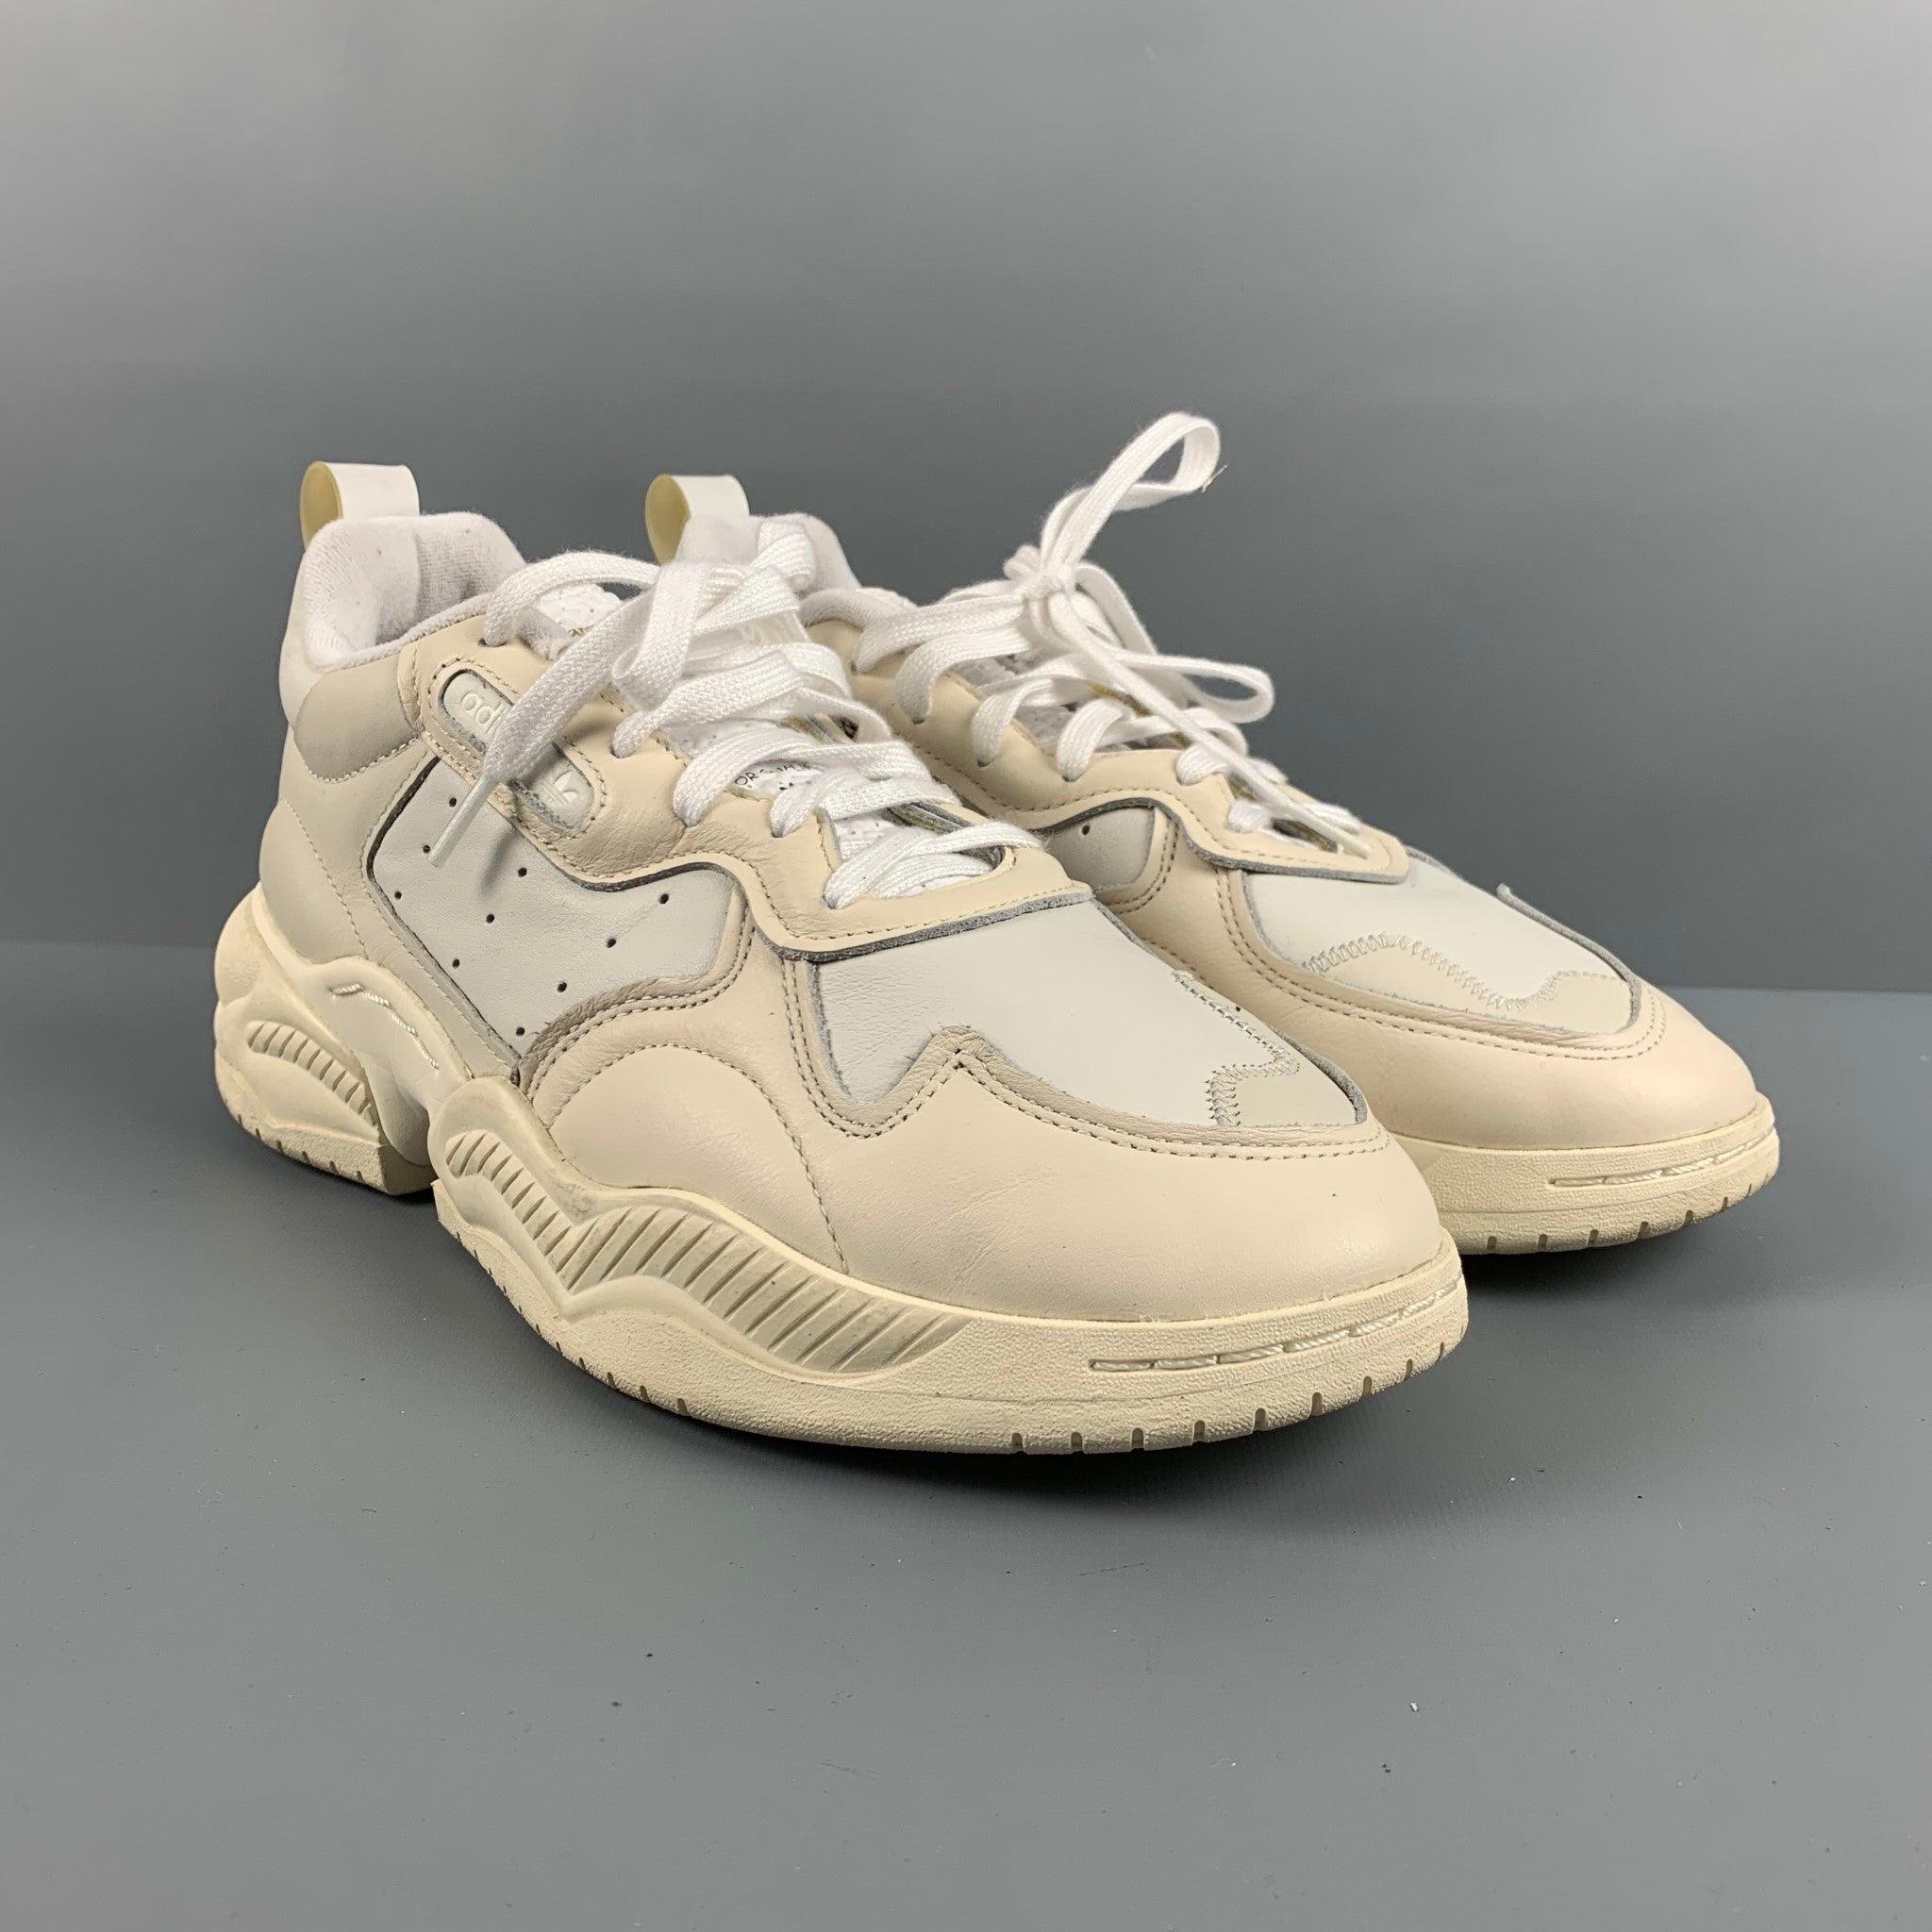 ADIDAS Supercourt RX sneakers in a white leather featuring a low top style, chunky heel, and rubber sole.Very Good Pre-Owned Condition. Minor signs of Wear. 

Marked:   US 10Outsole:12.25 inches  x 5.5 inches 
  
  
 
Reference: 127375
Category: